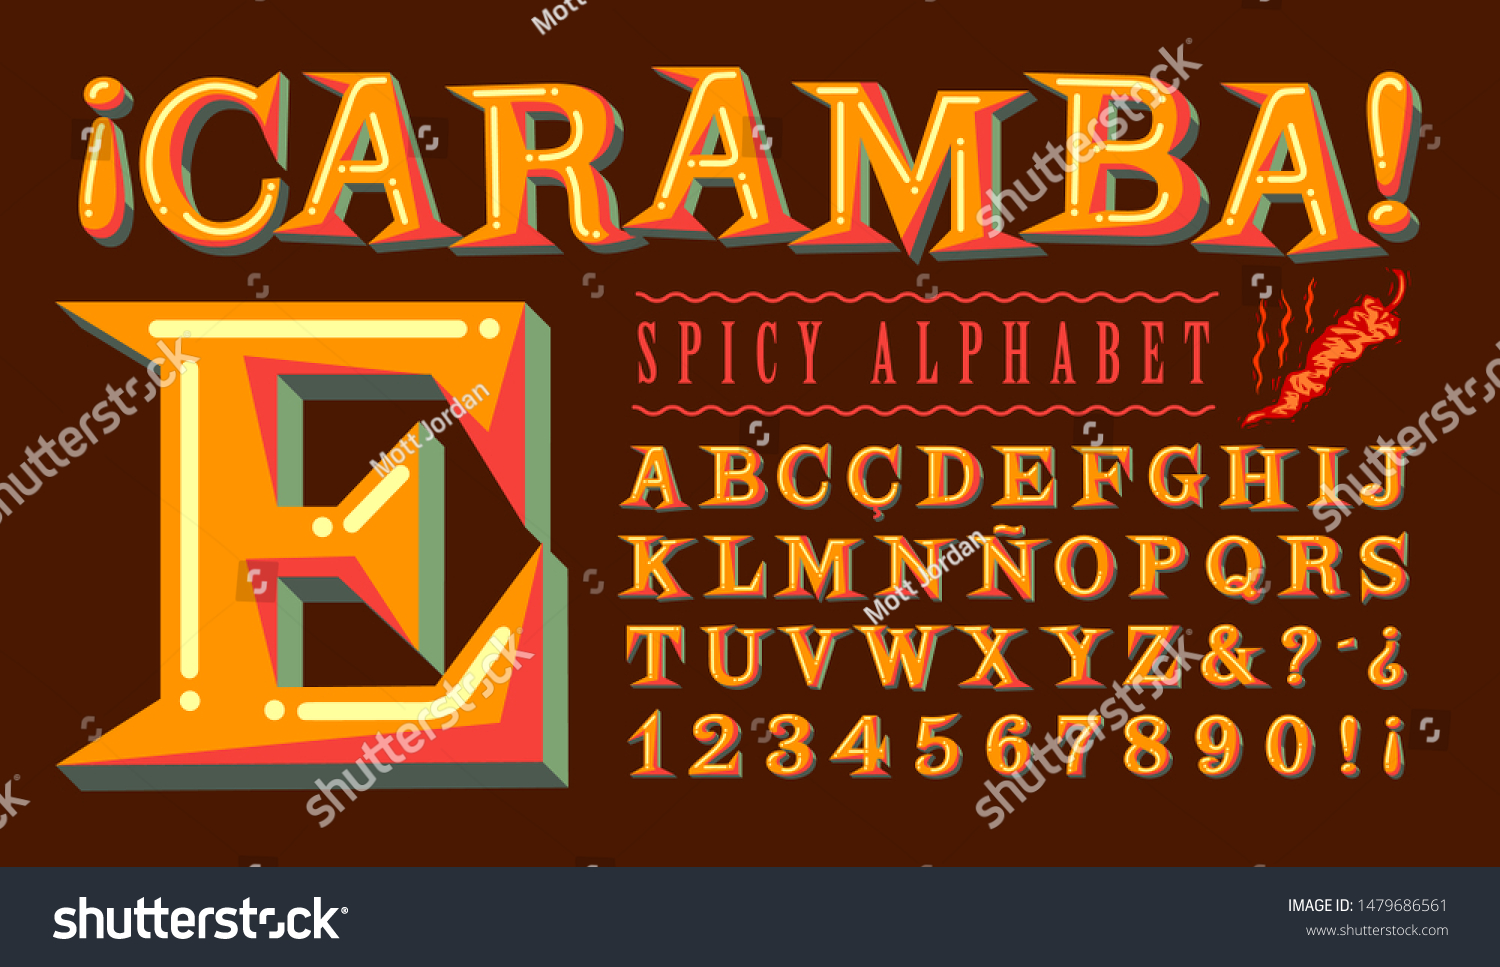 Caramba Spicy Alphabet is a lively Hispanic-flavored font. Translation: The word "caramba" is a Spanish language expression of surprise or amazement with no direct translation in English. #1479686561